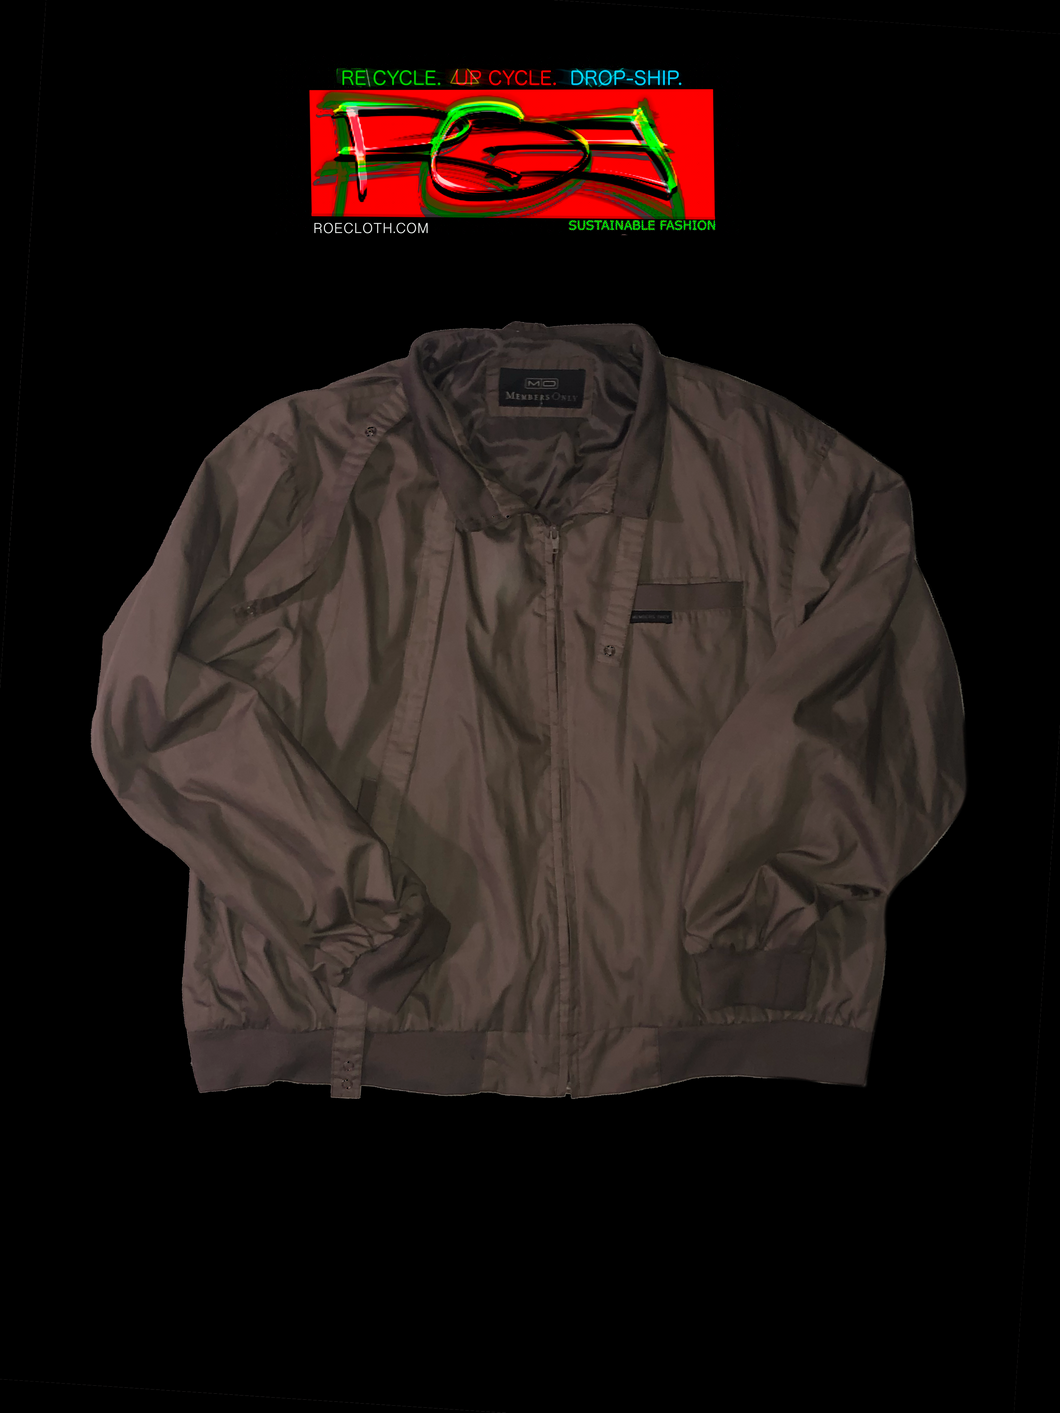 MEMBERS ONLY JACKET